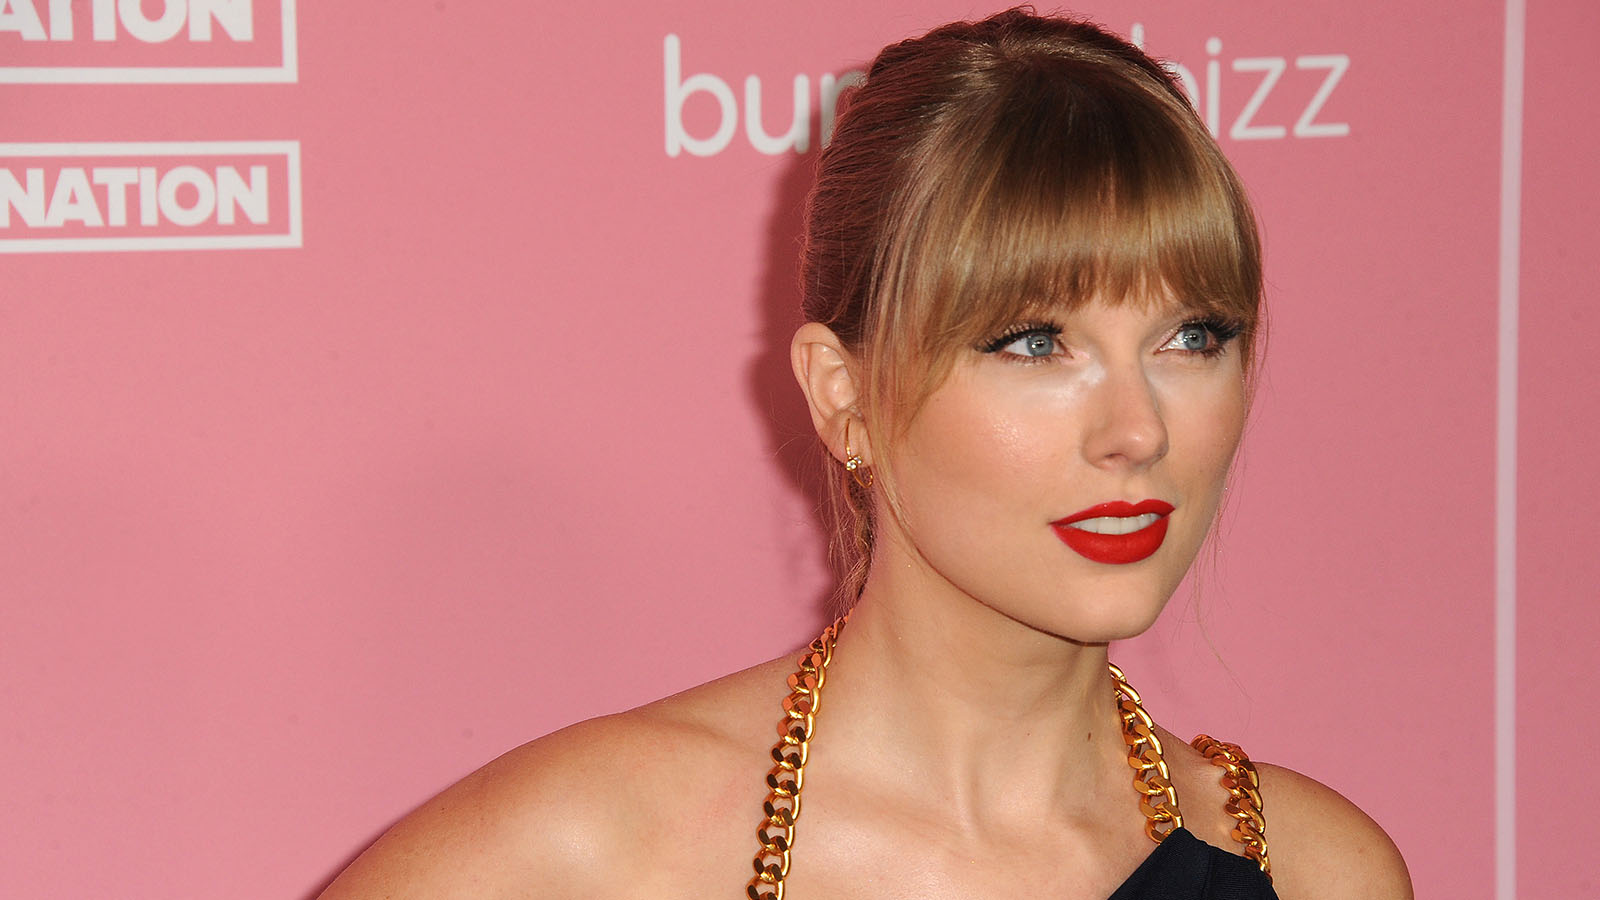 A close up of Taylor Swift on a red carpet representing Ticketmaster cancel Taylor Swift ticket sales.